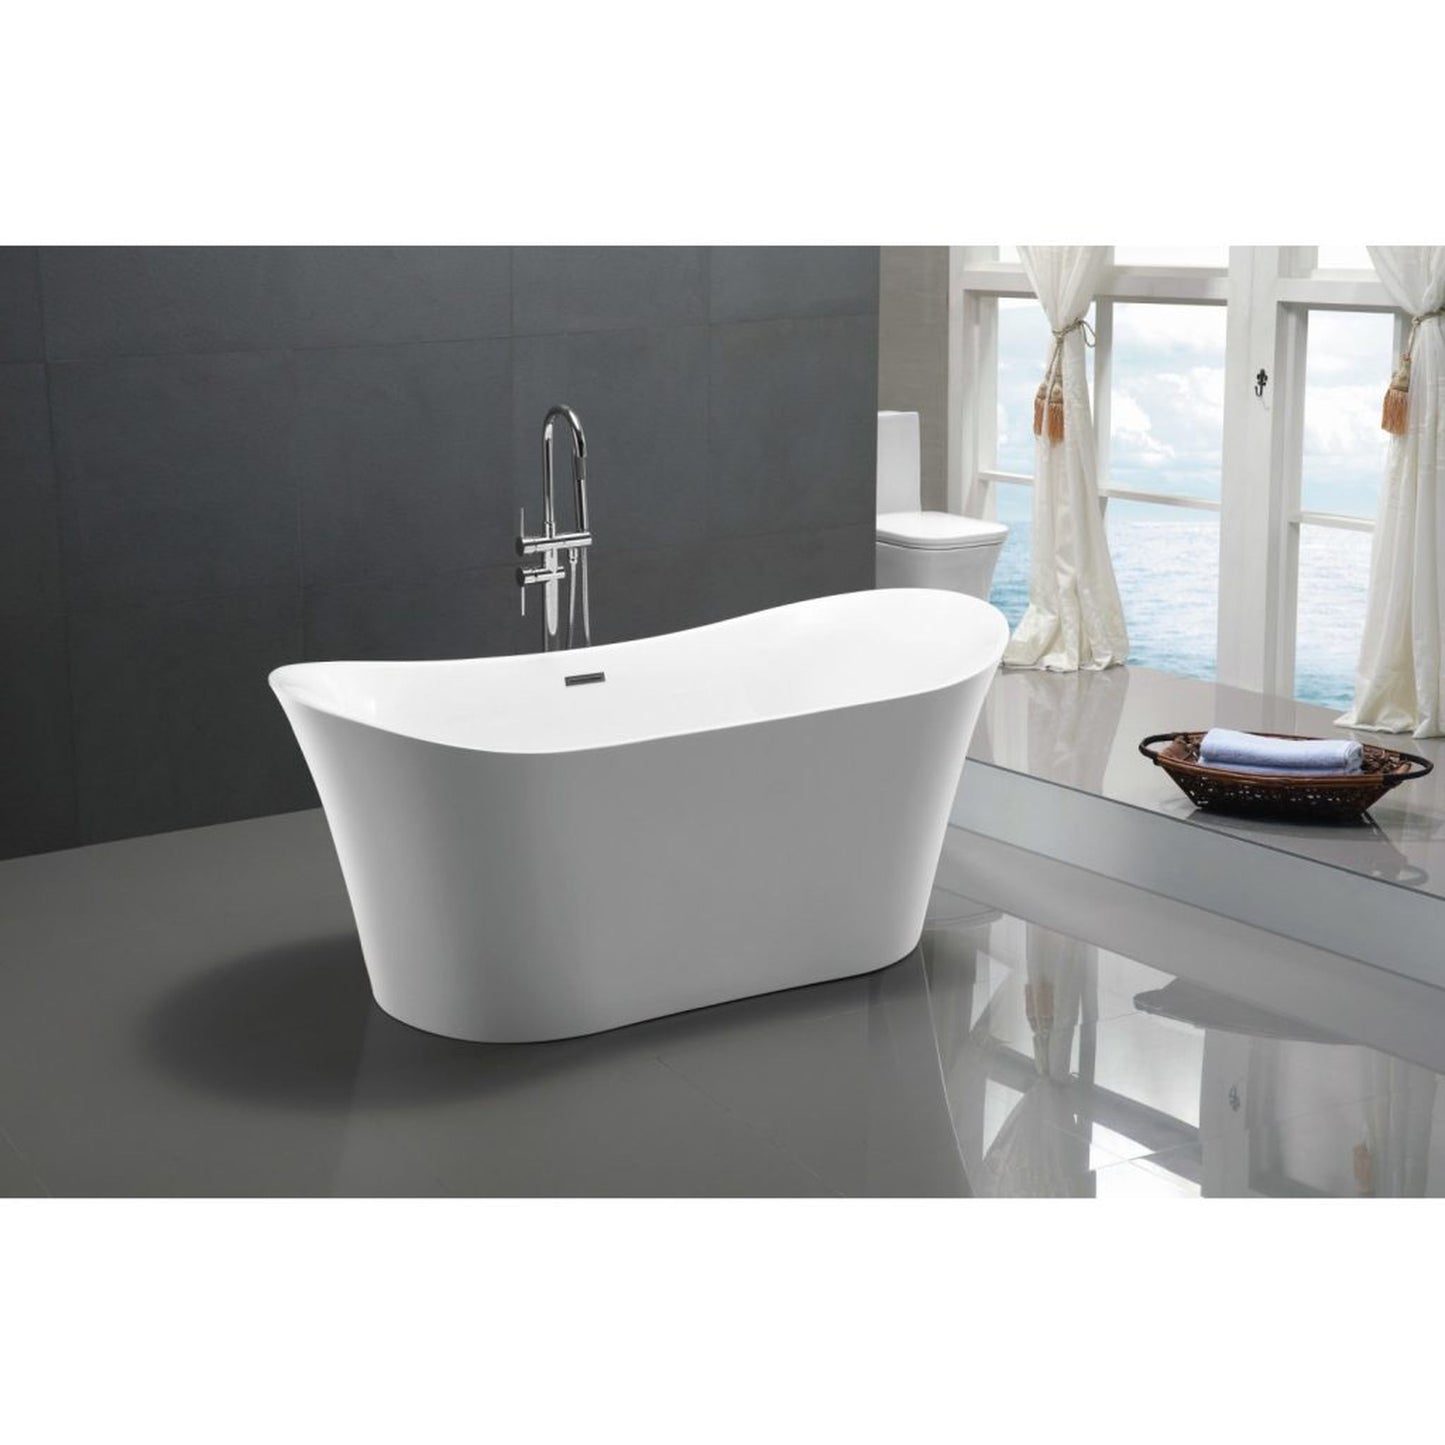 ANZZI Eft Series 67" x 31" Freestanding Glossy White Bathtub With Built-In Overflow